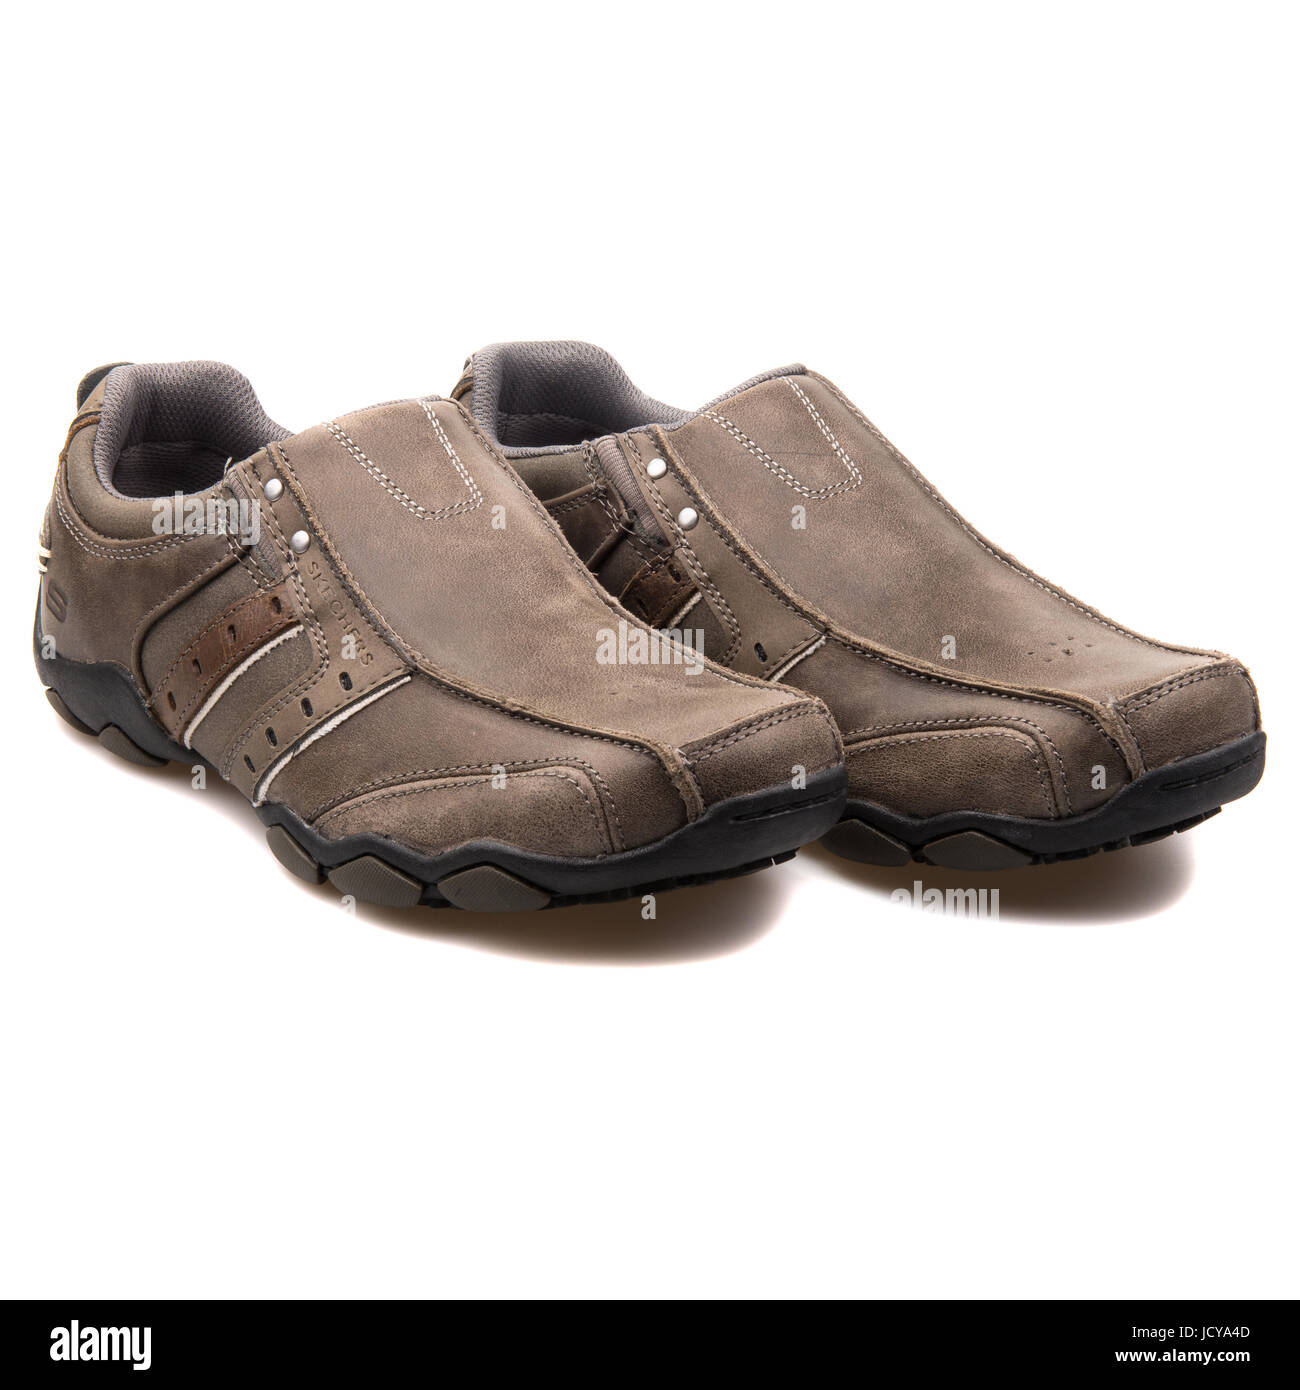 Skechers Diameter Charcoal Men's Leather Shoes - 61779-CHAR Stock Photo Alamy